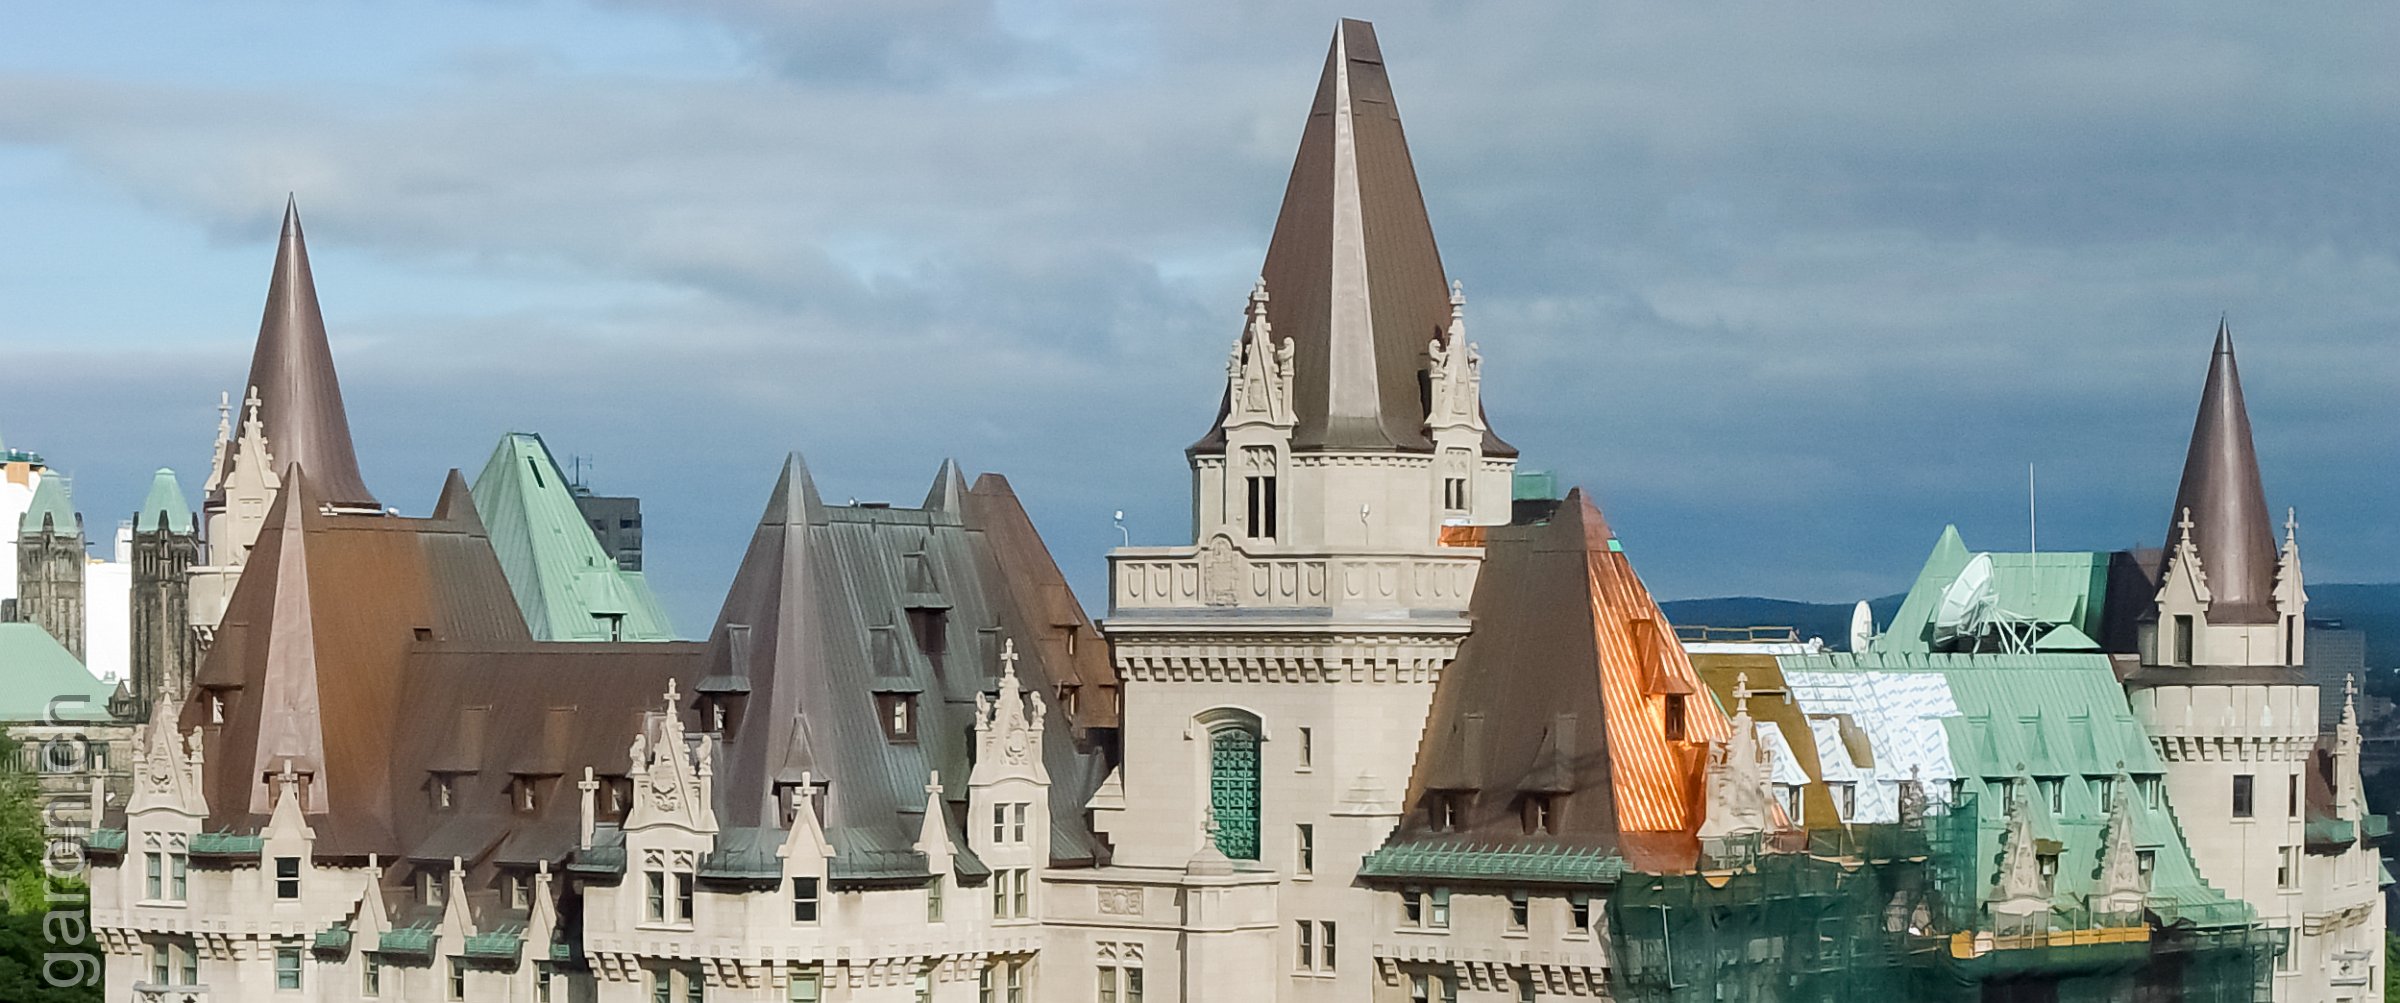 Ottawa, Chateau Laurier, copper roof Renovating the copper roof is a perpetual process